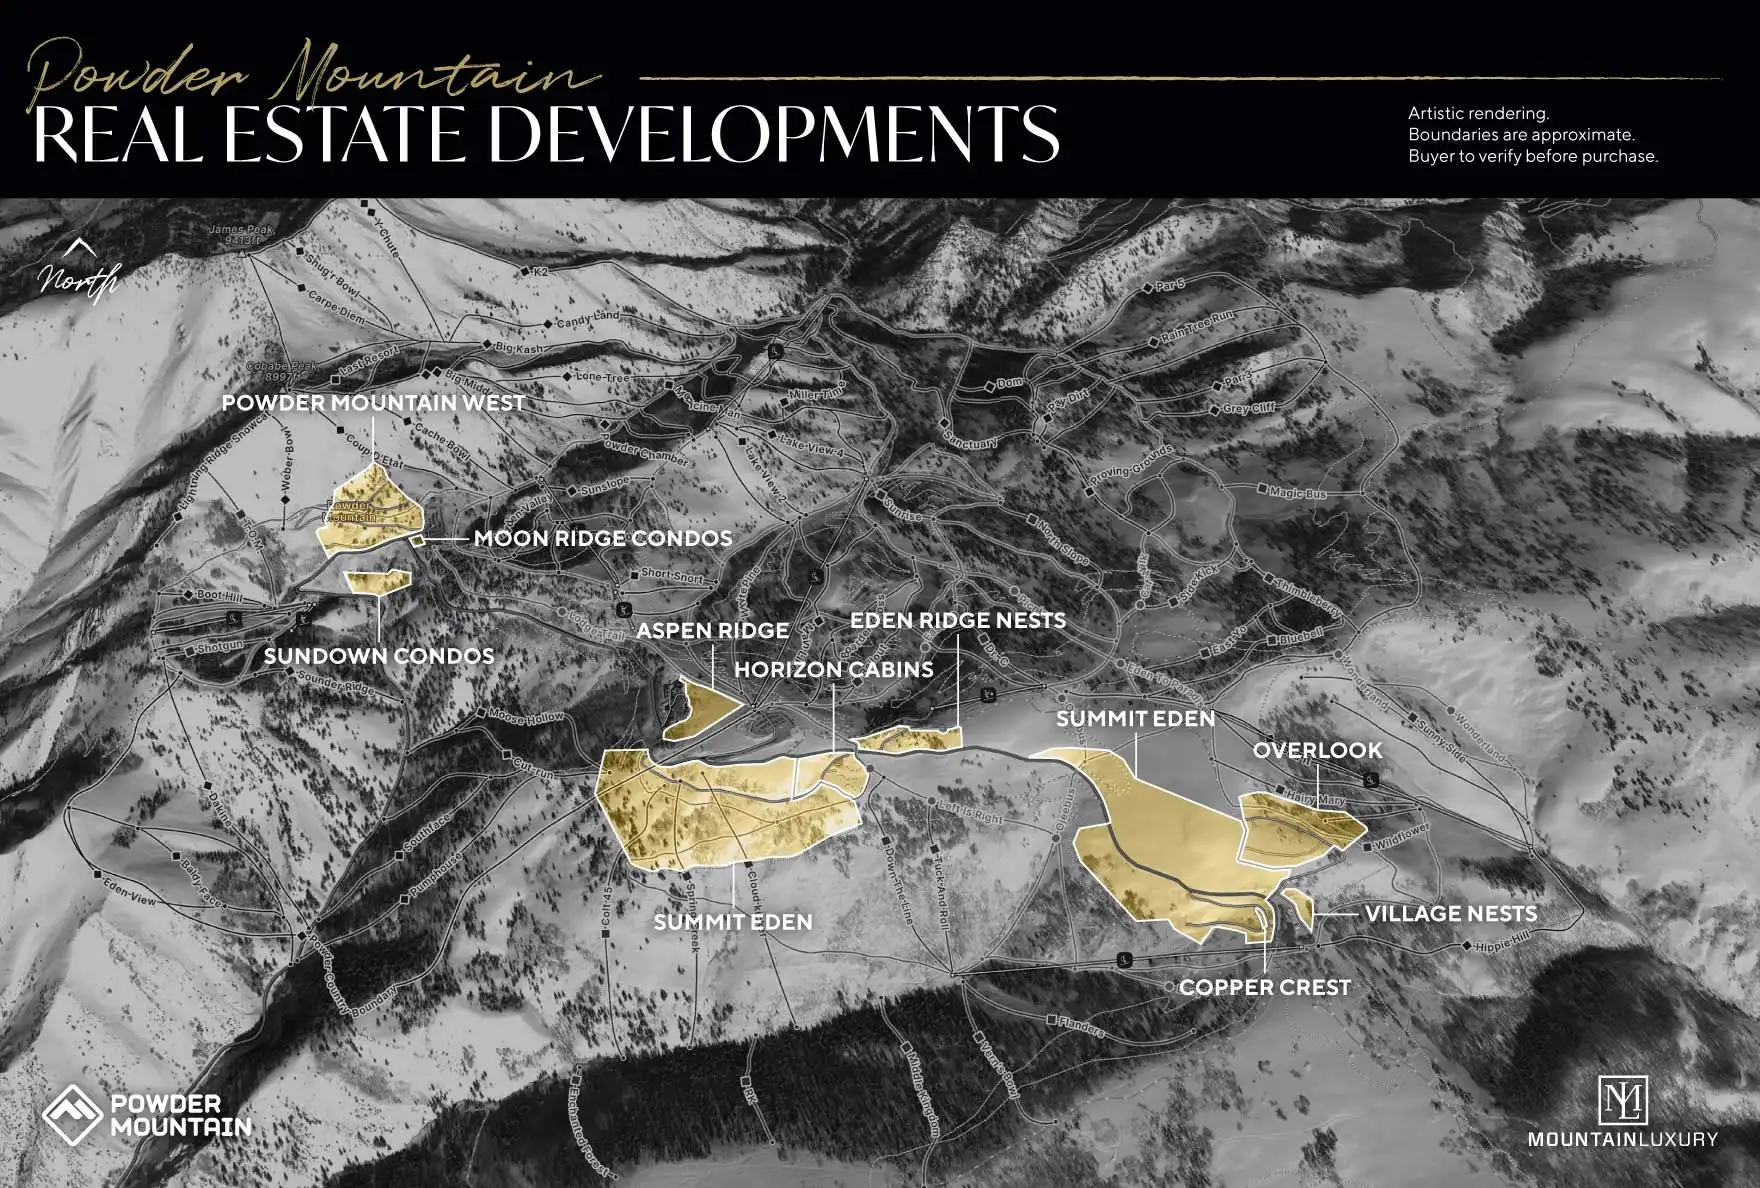 Artistic rendering of Powder Mountain's real estate developments and their locations on the mountain.